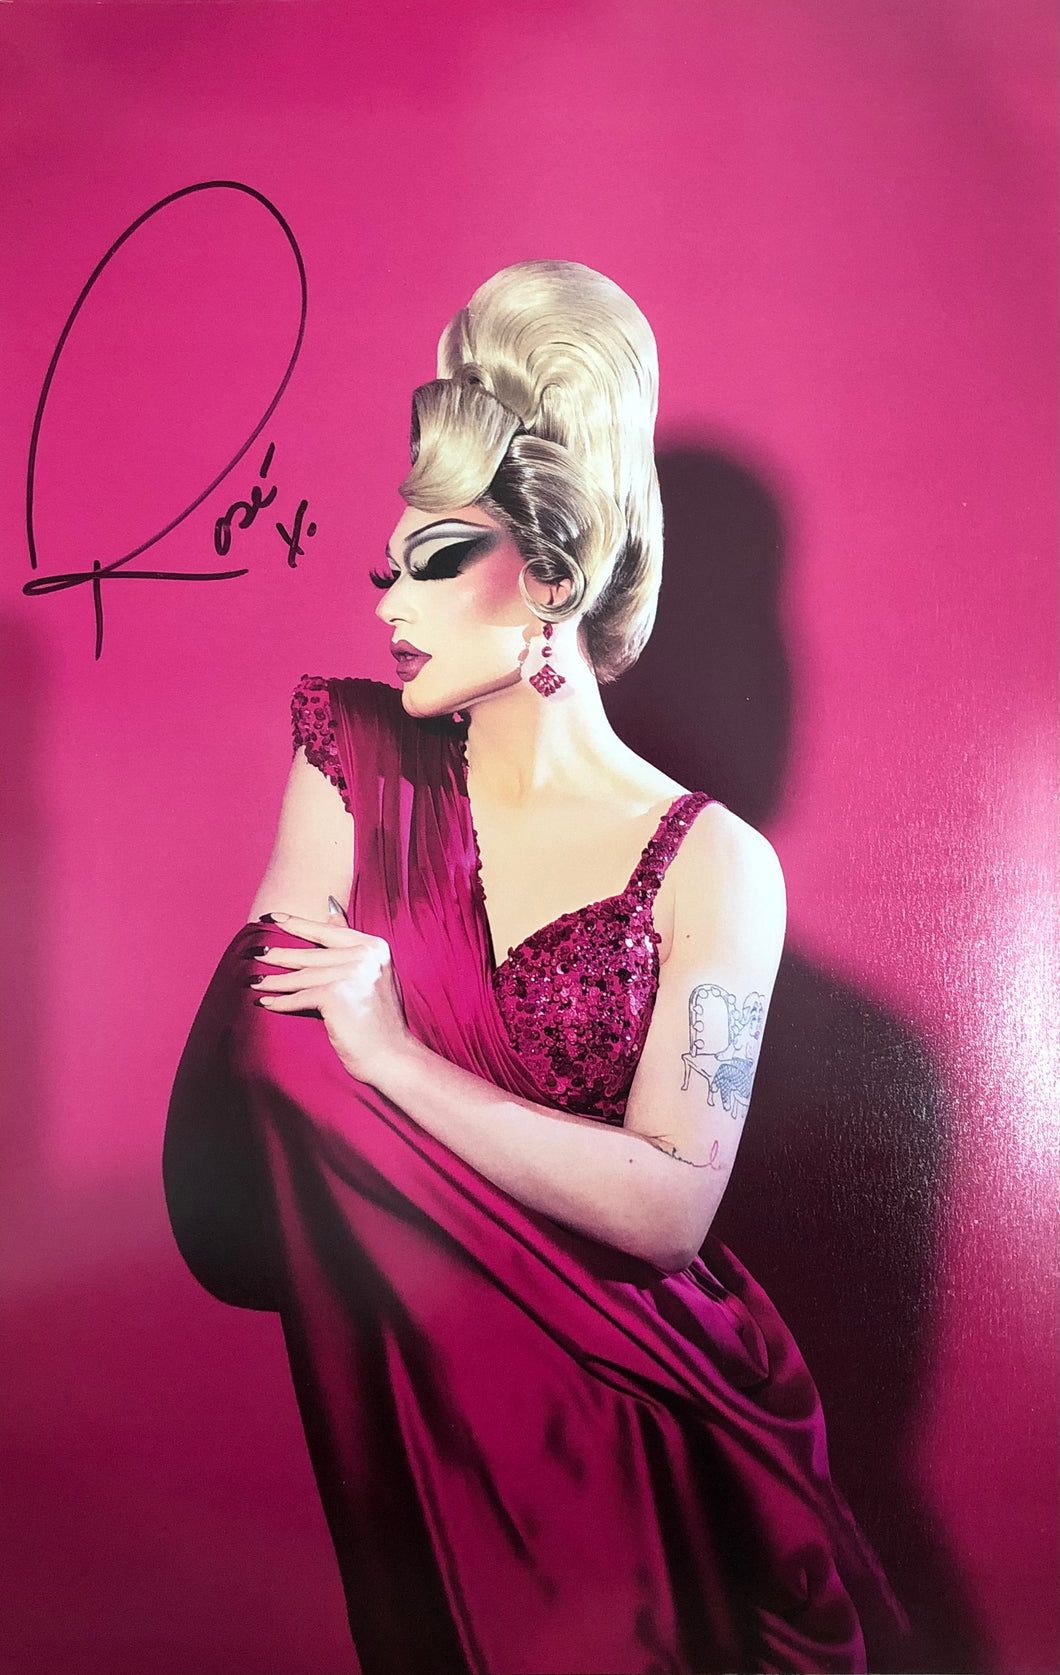 Rose Pink Gown Poster 11x17